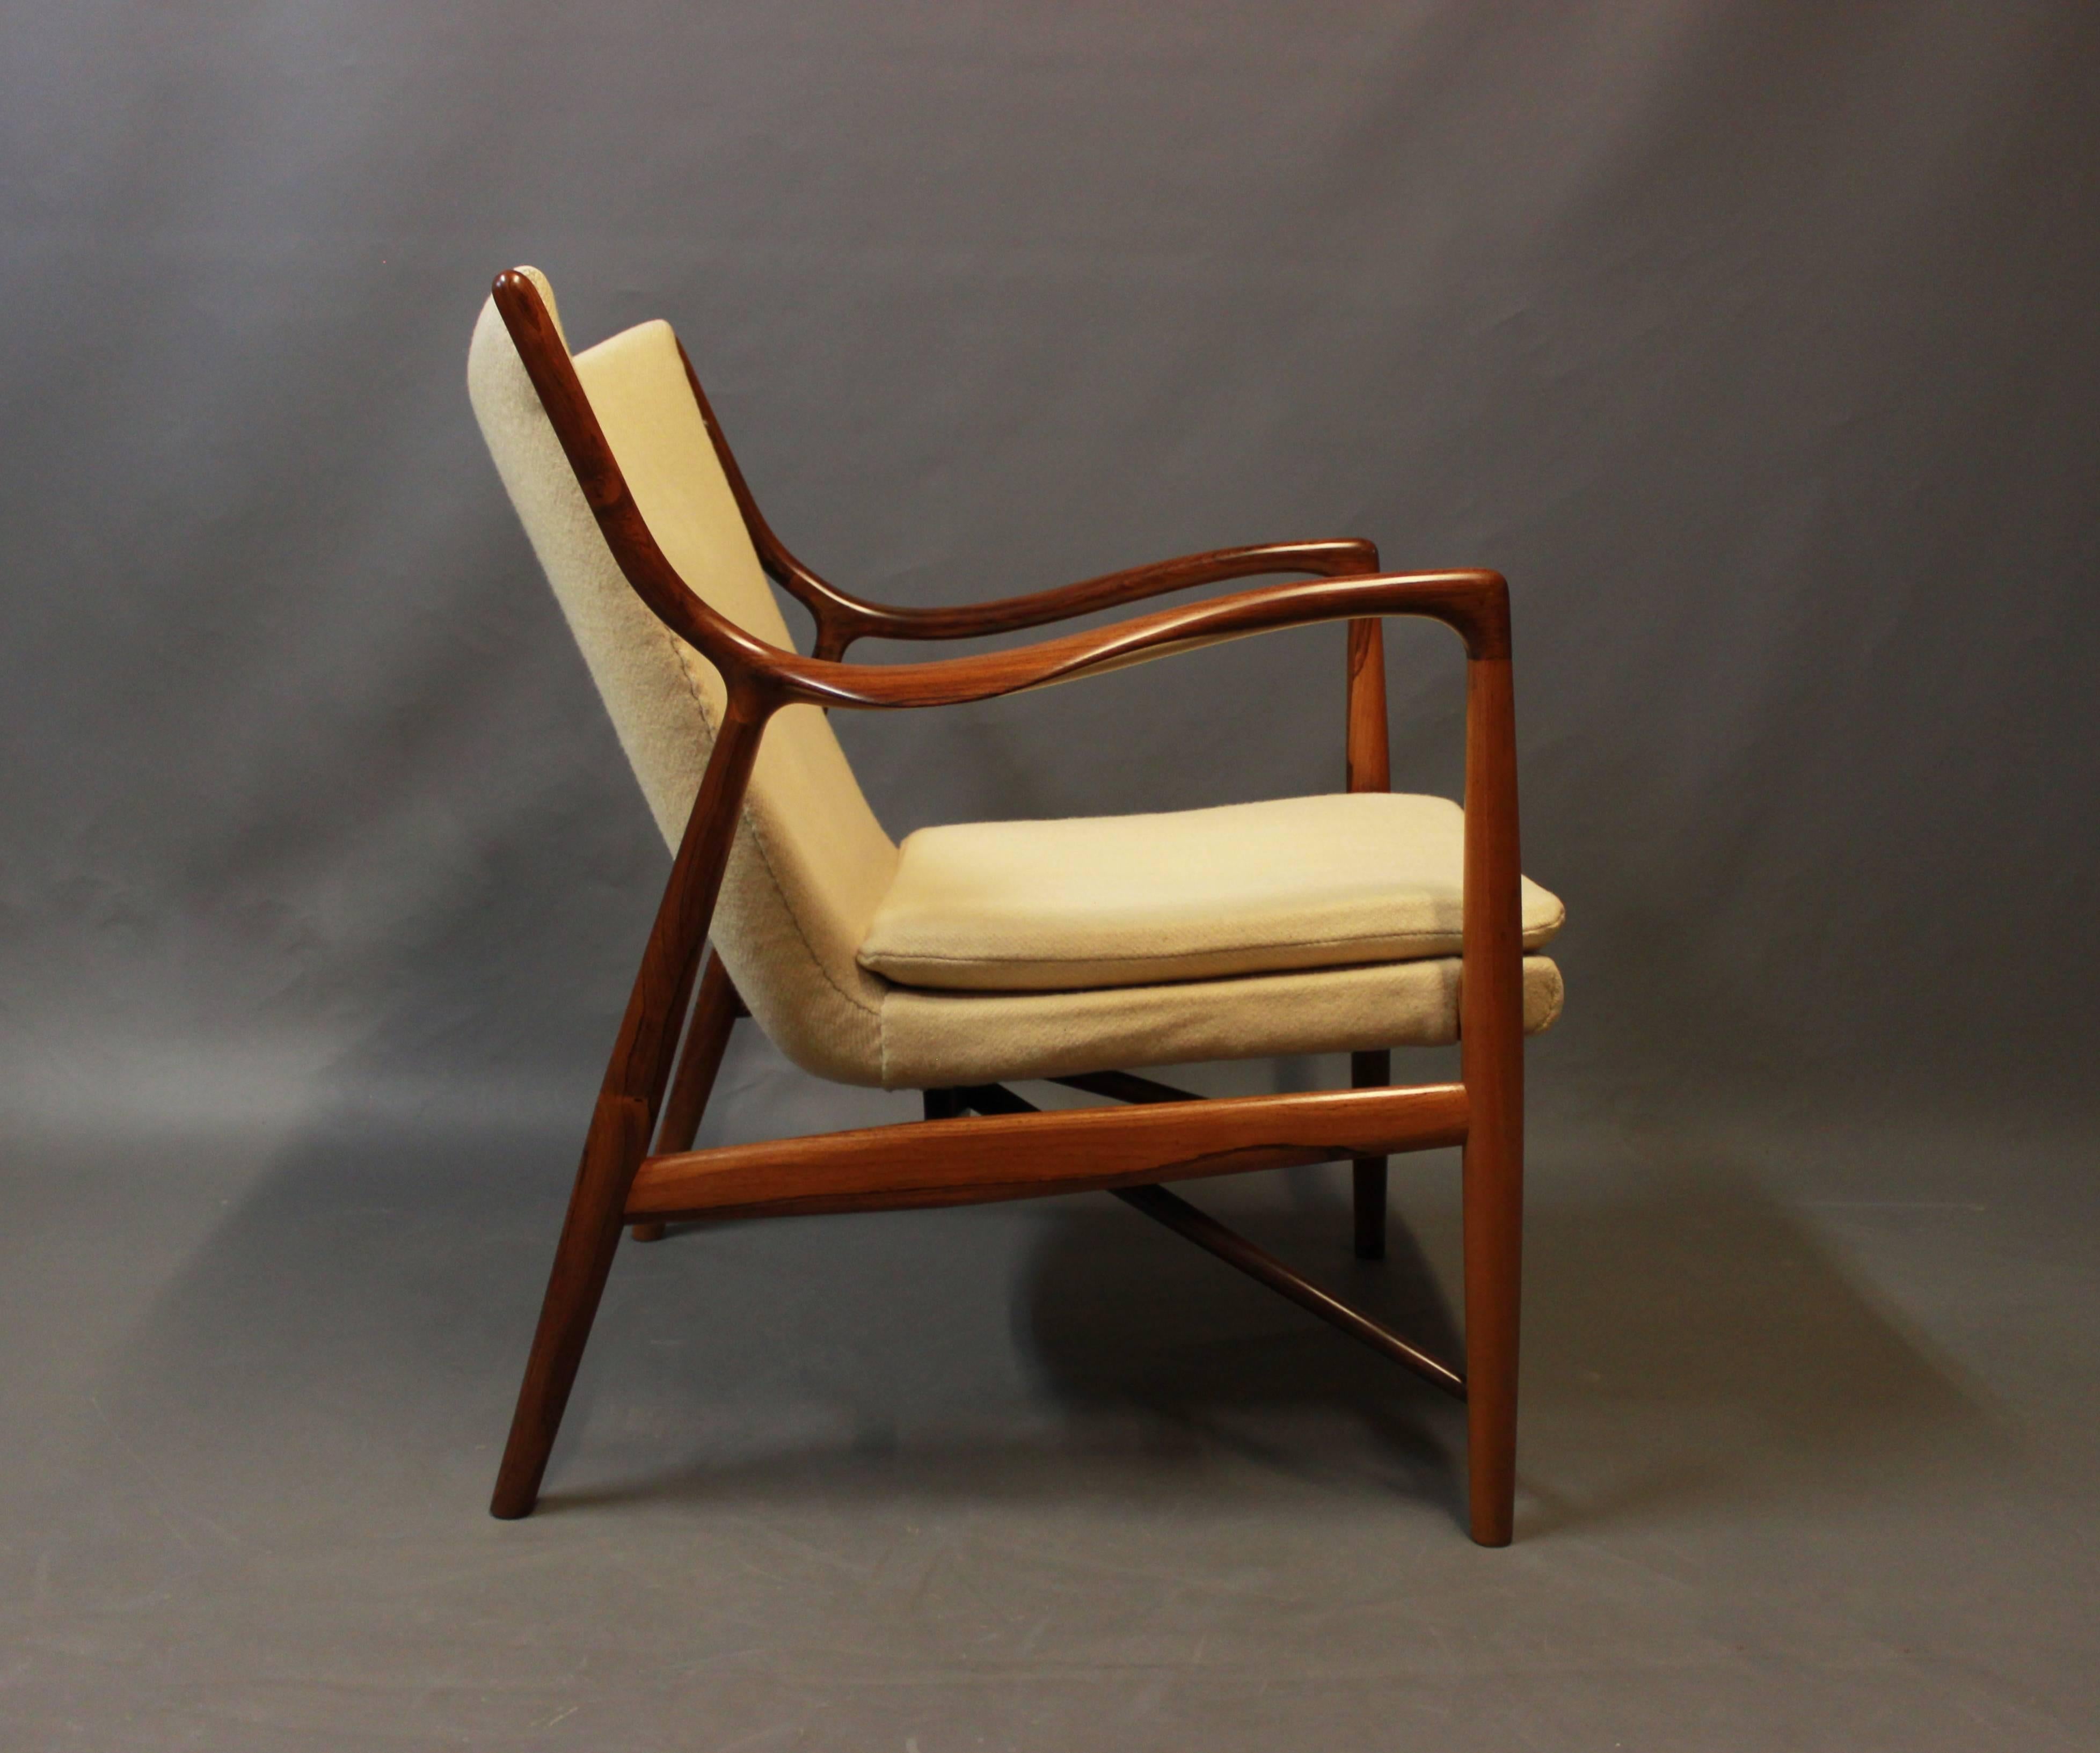 NV45 armchair in rosewood and light wool designed by Finn Juhl in 1945 and manufactured by Niels Vodder in the late 1940s. The chair is in excellent condition.